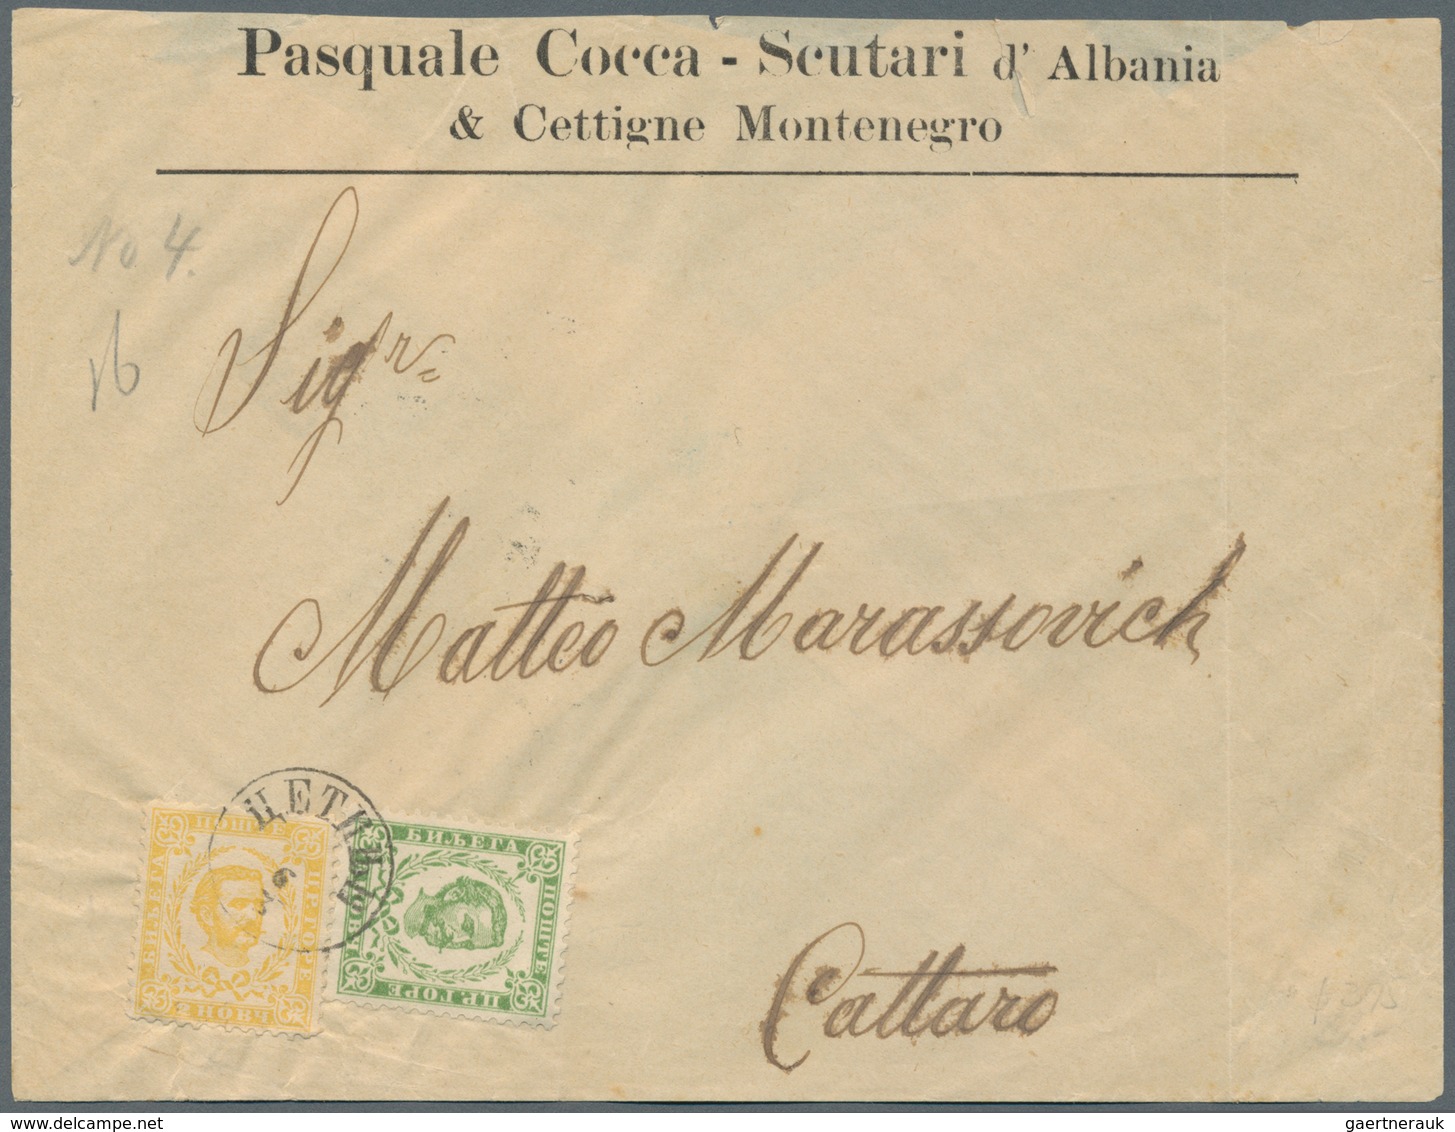 Montenegro: 1896, Commercial Envelope Franked With 2n, Narrow Margins And 3n, Wide Margins, Both Thi - Montenegro